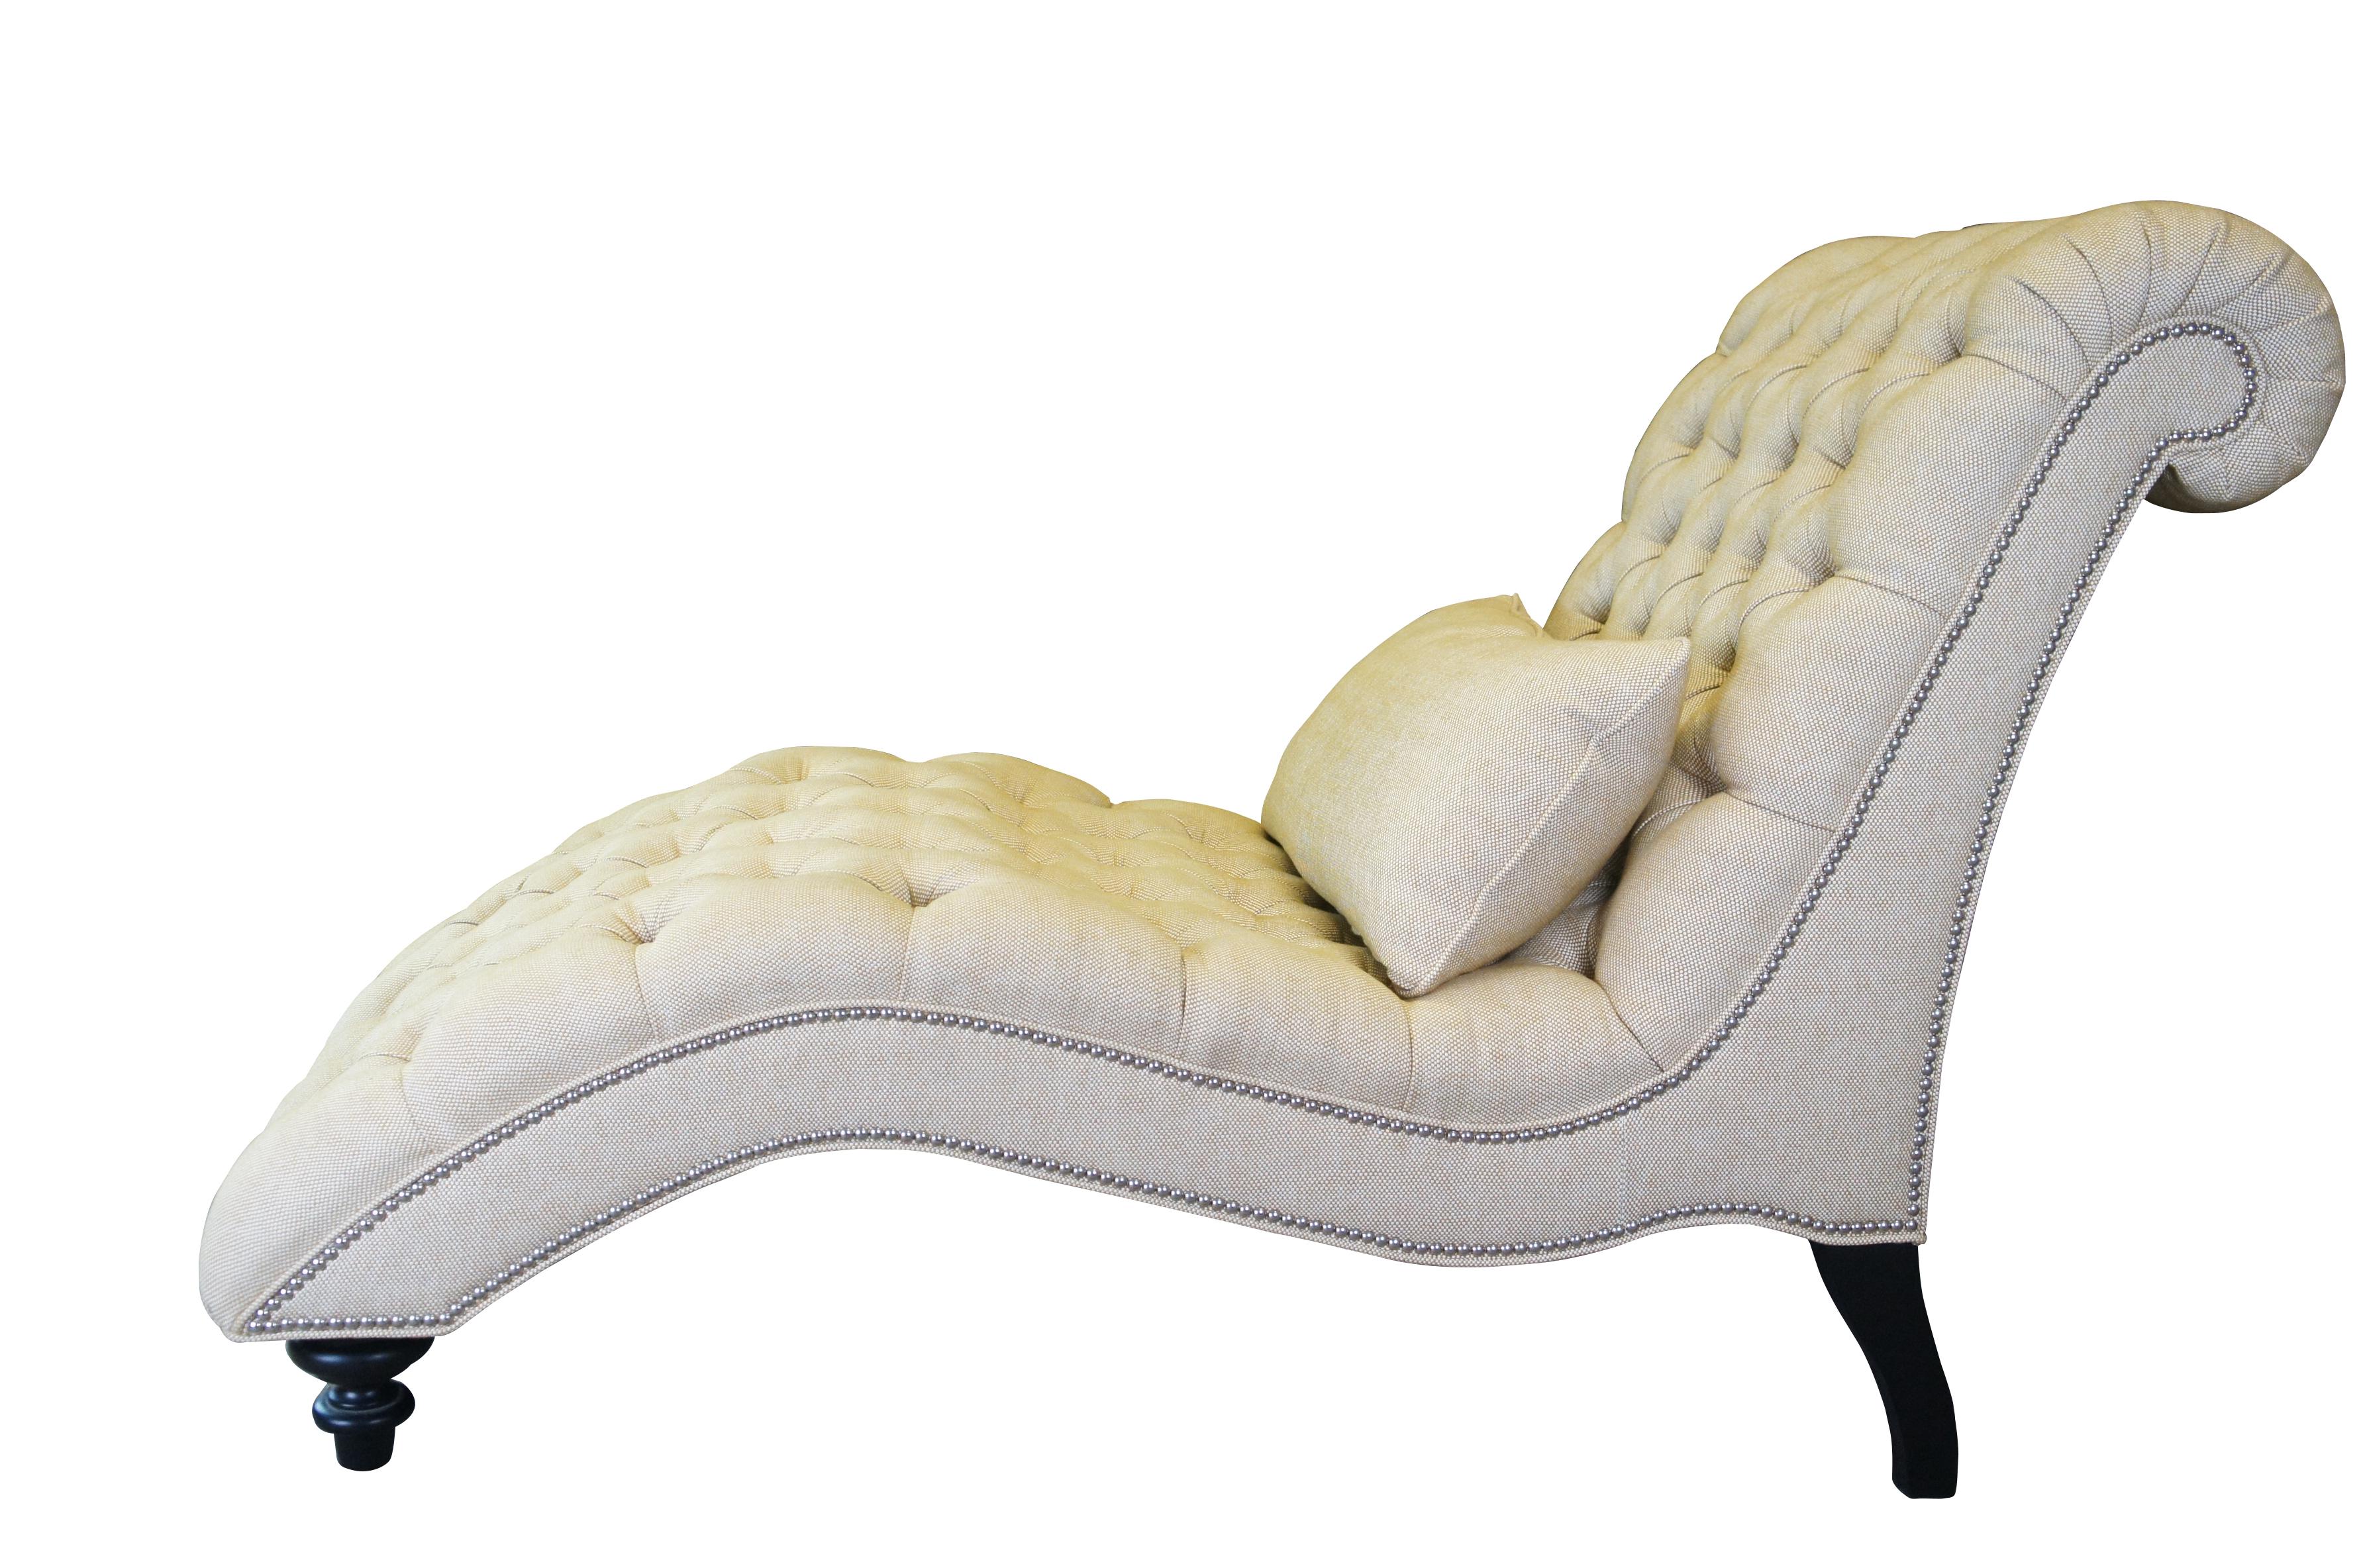 Lexington Upholstery by Lexington Althena Chaise Lounge, ITEM #: 7802-75. Features a traditional form with rolled back, tufted seat and silver nail head trim over turned legs.  Upholstered in beige with 27 x 15